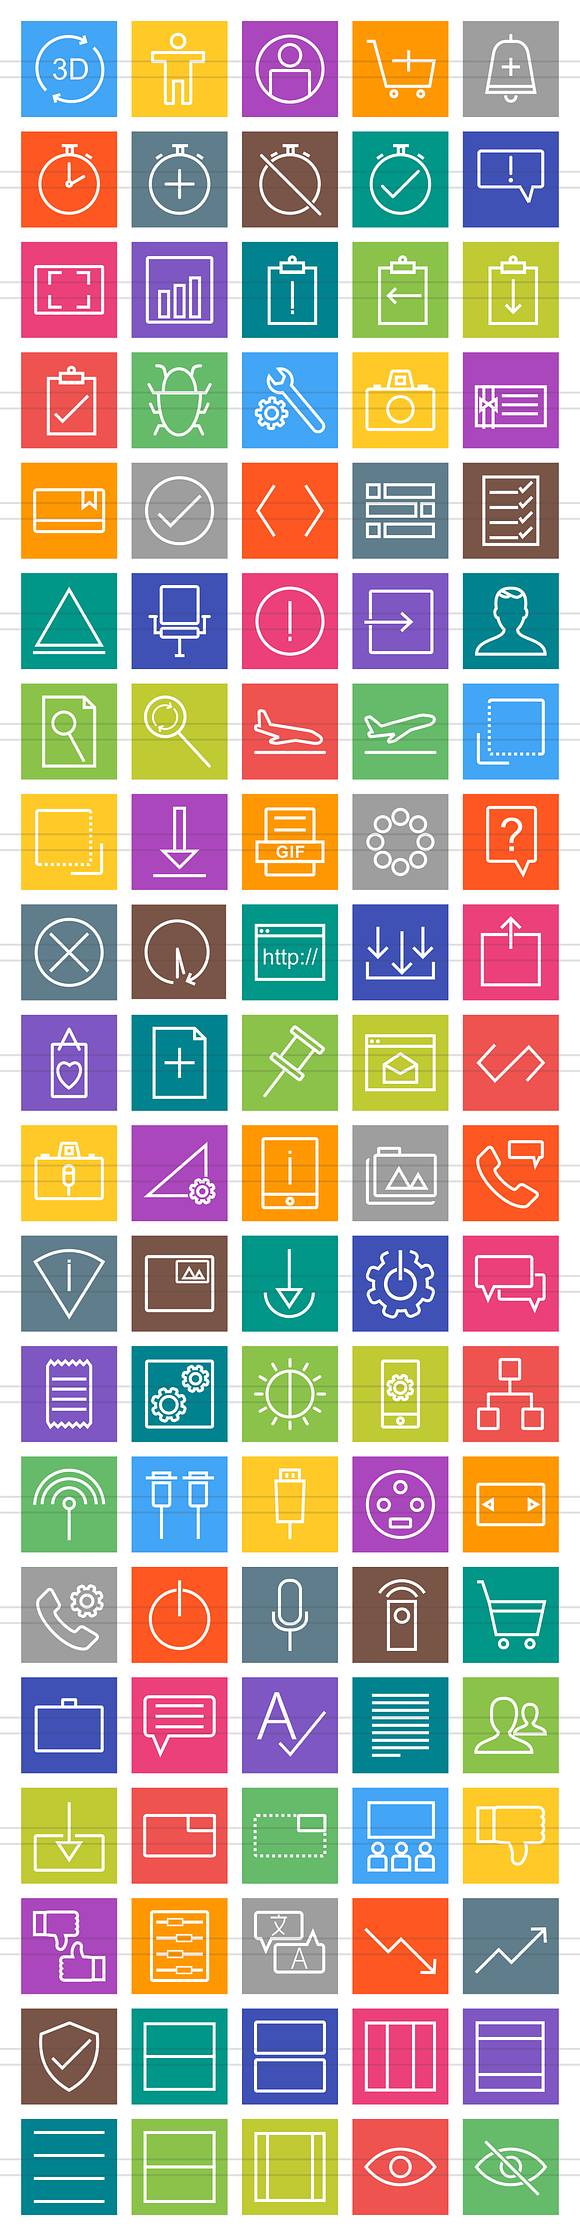 100 Material Design Line Icons in Graphics - product preview 1